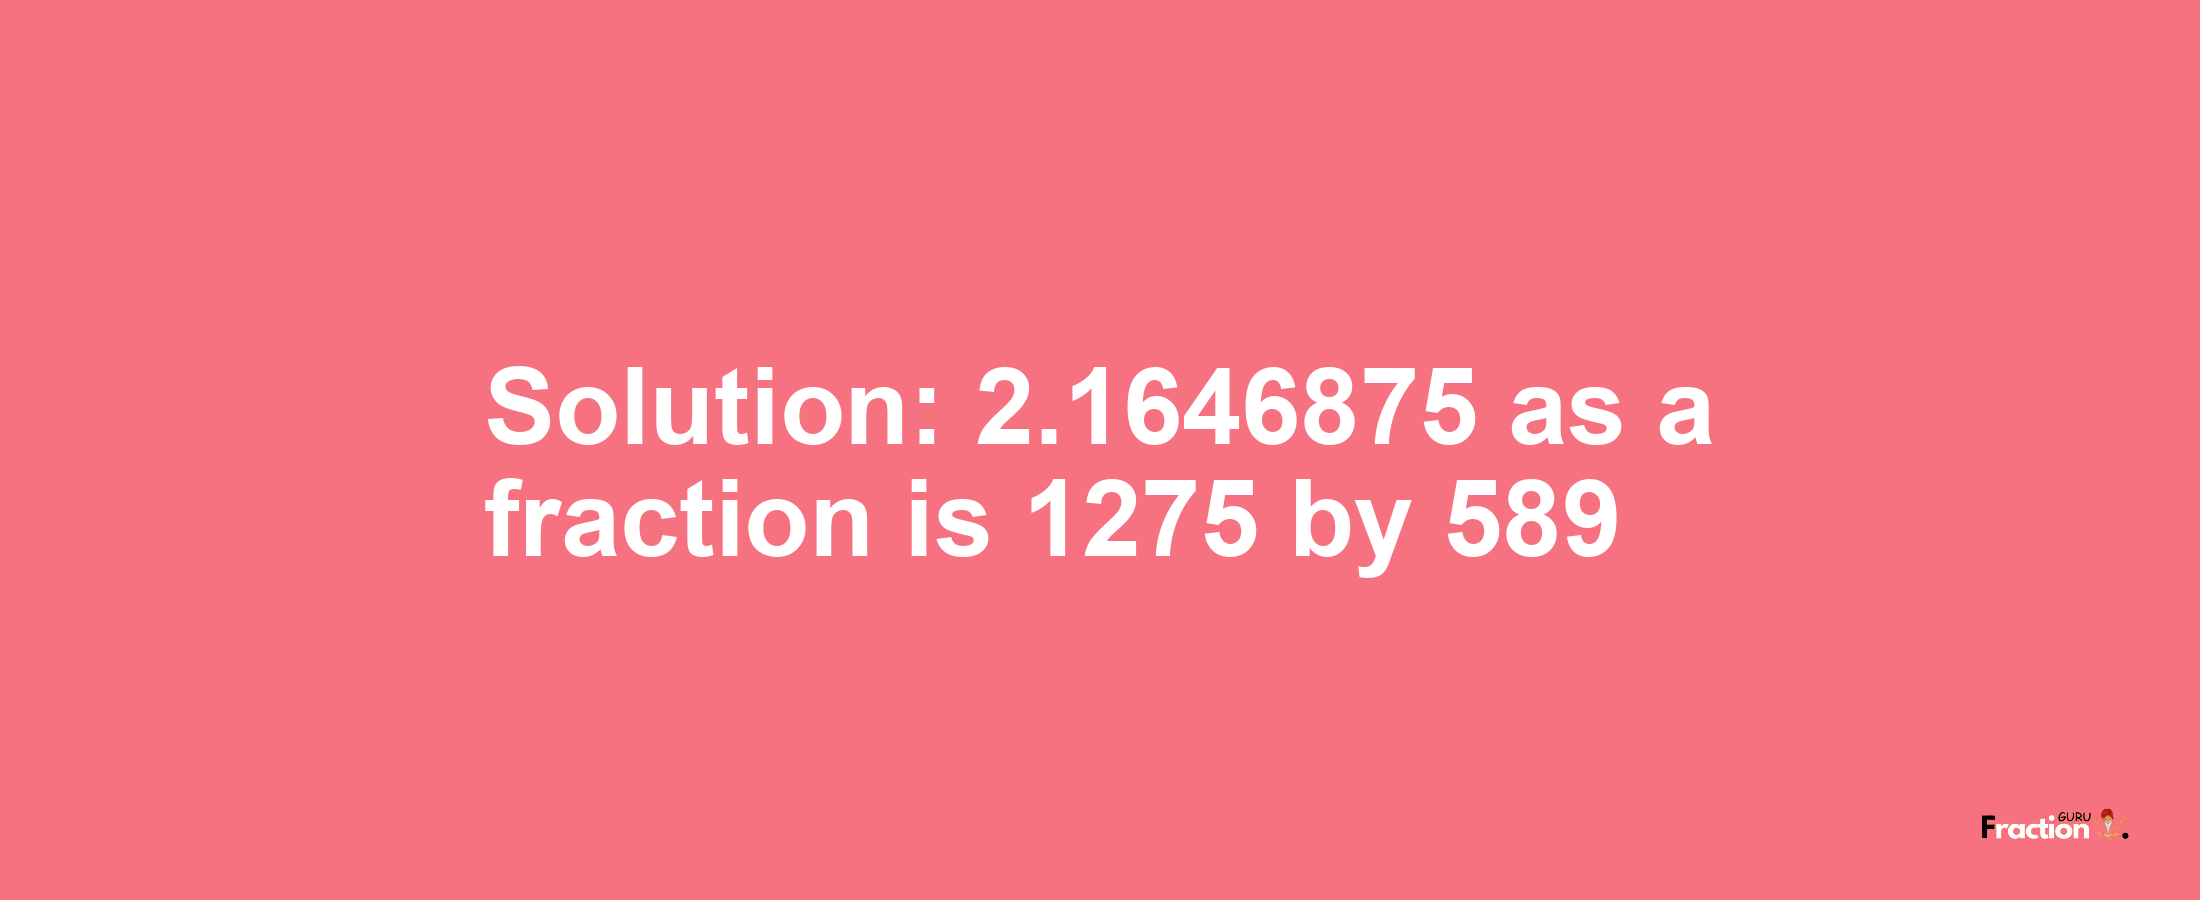 Solution:2.1646875 as a fraction is 1275/589